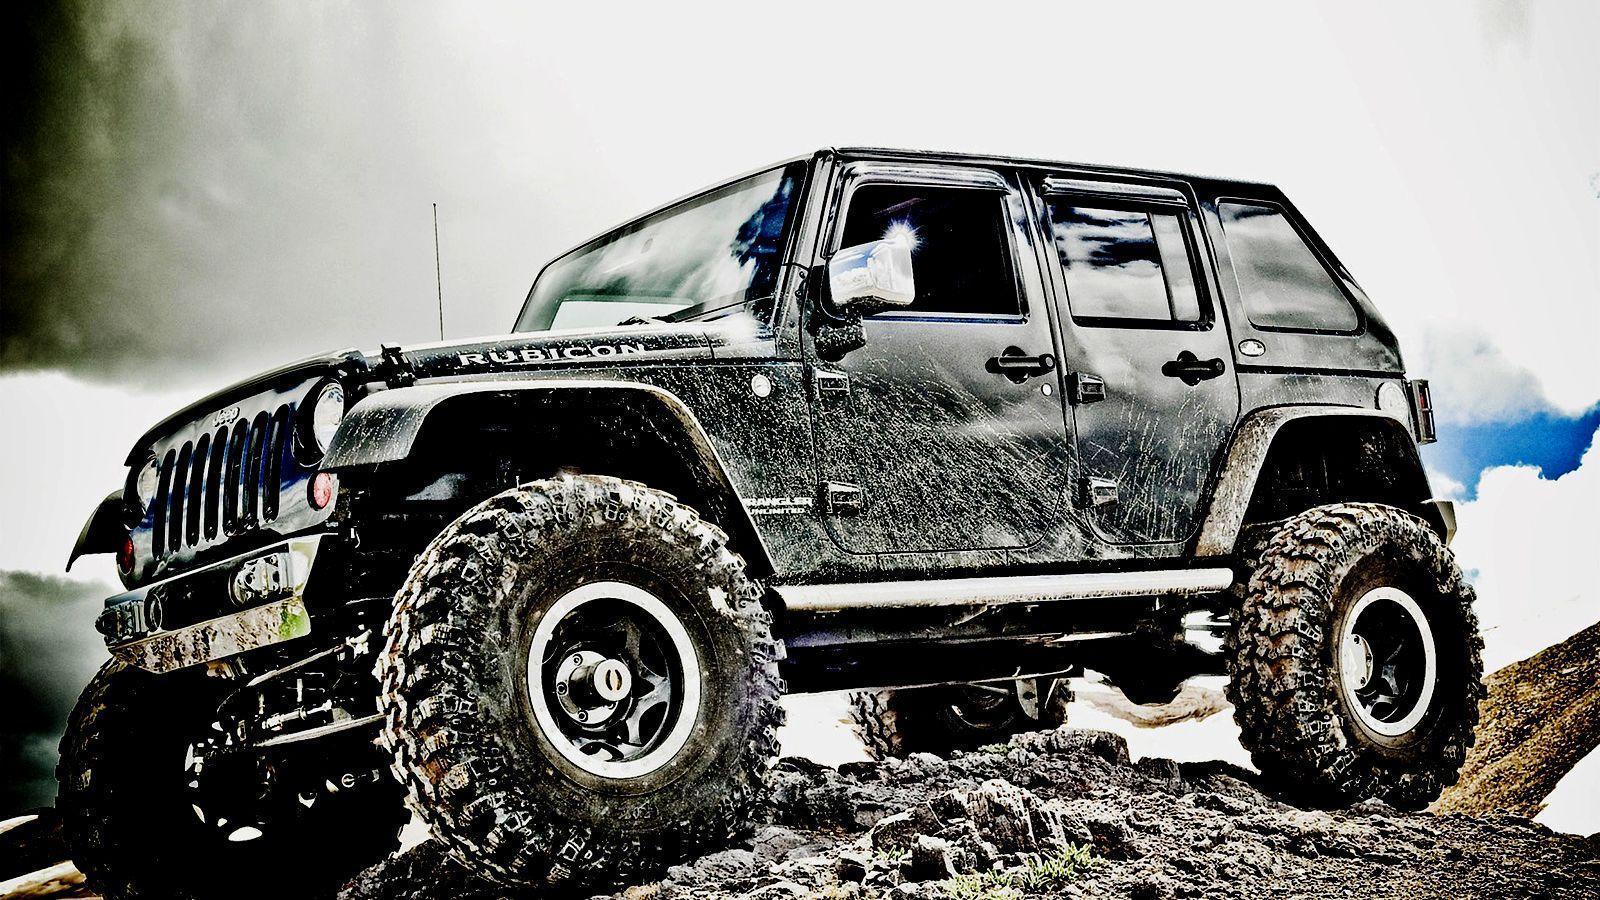 OFF ROAD VEHICLES 4X4 JEEPS HD WALLPAPERS For Windows 7